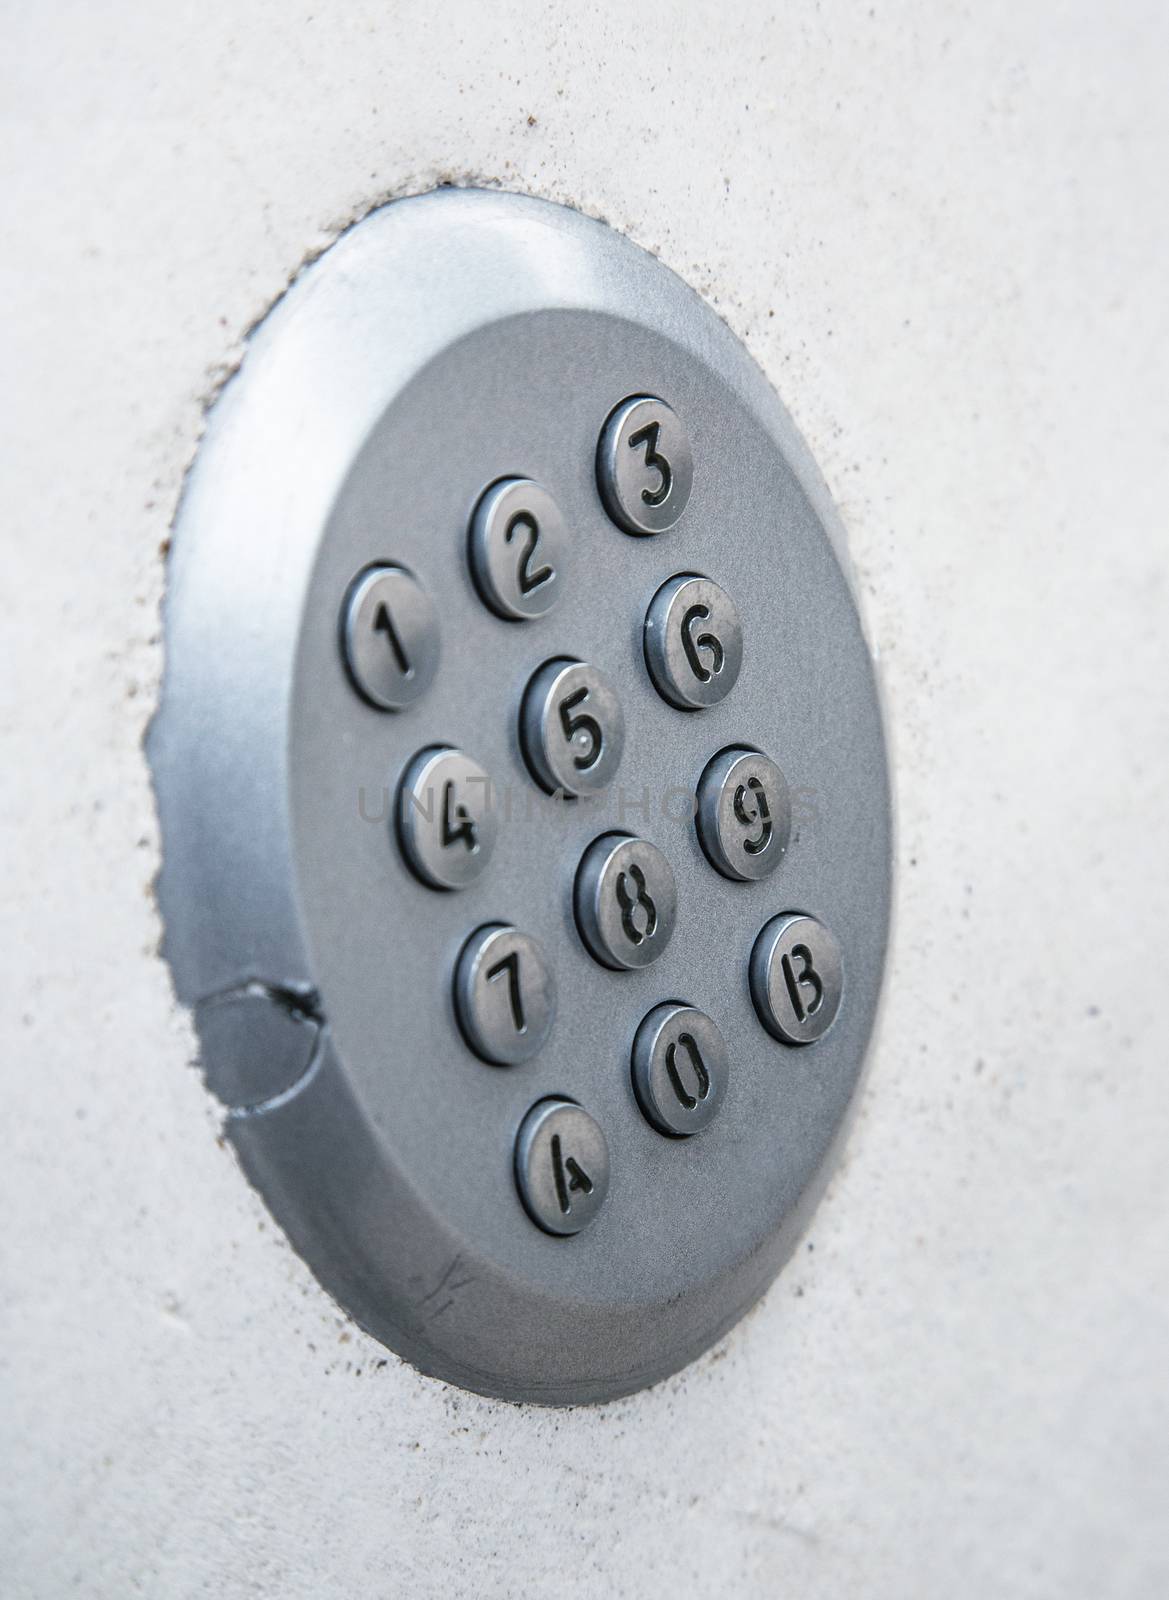 Security access with keypad on the wall